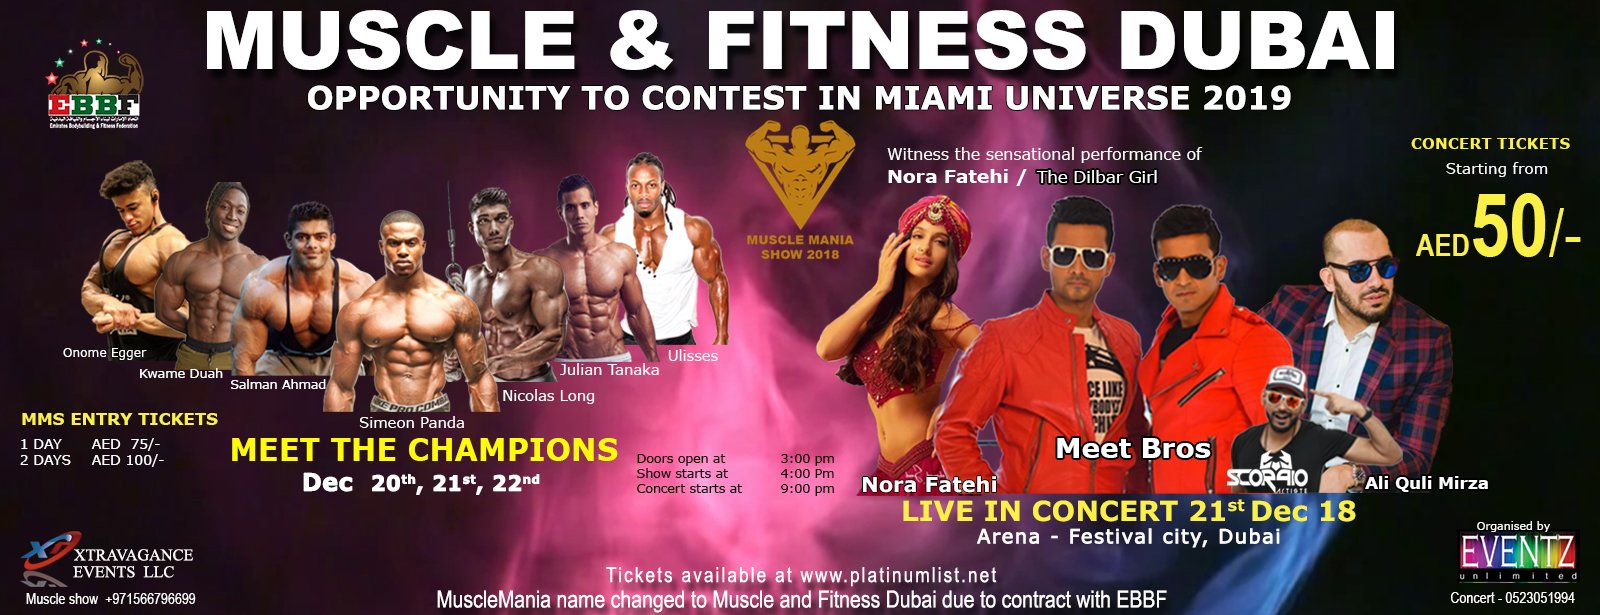 Muscle & Fitness Dubai – Live in concert - Coming Soon in UAE